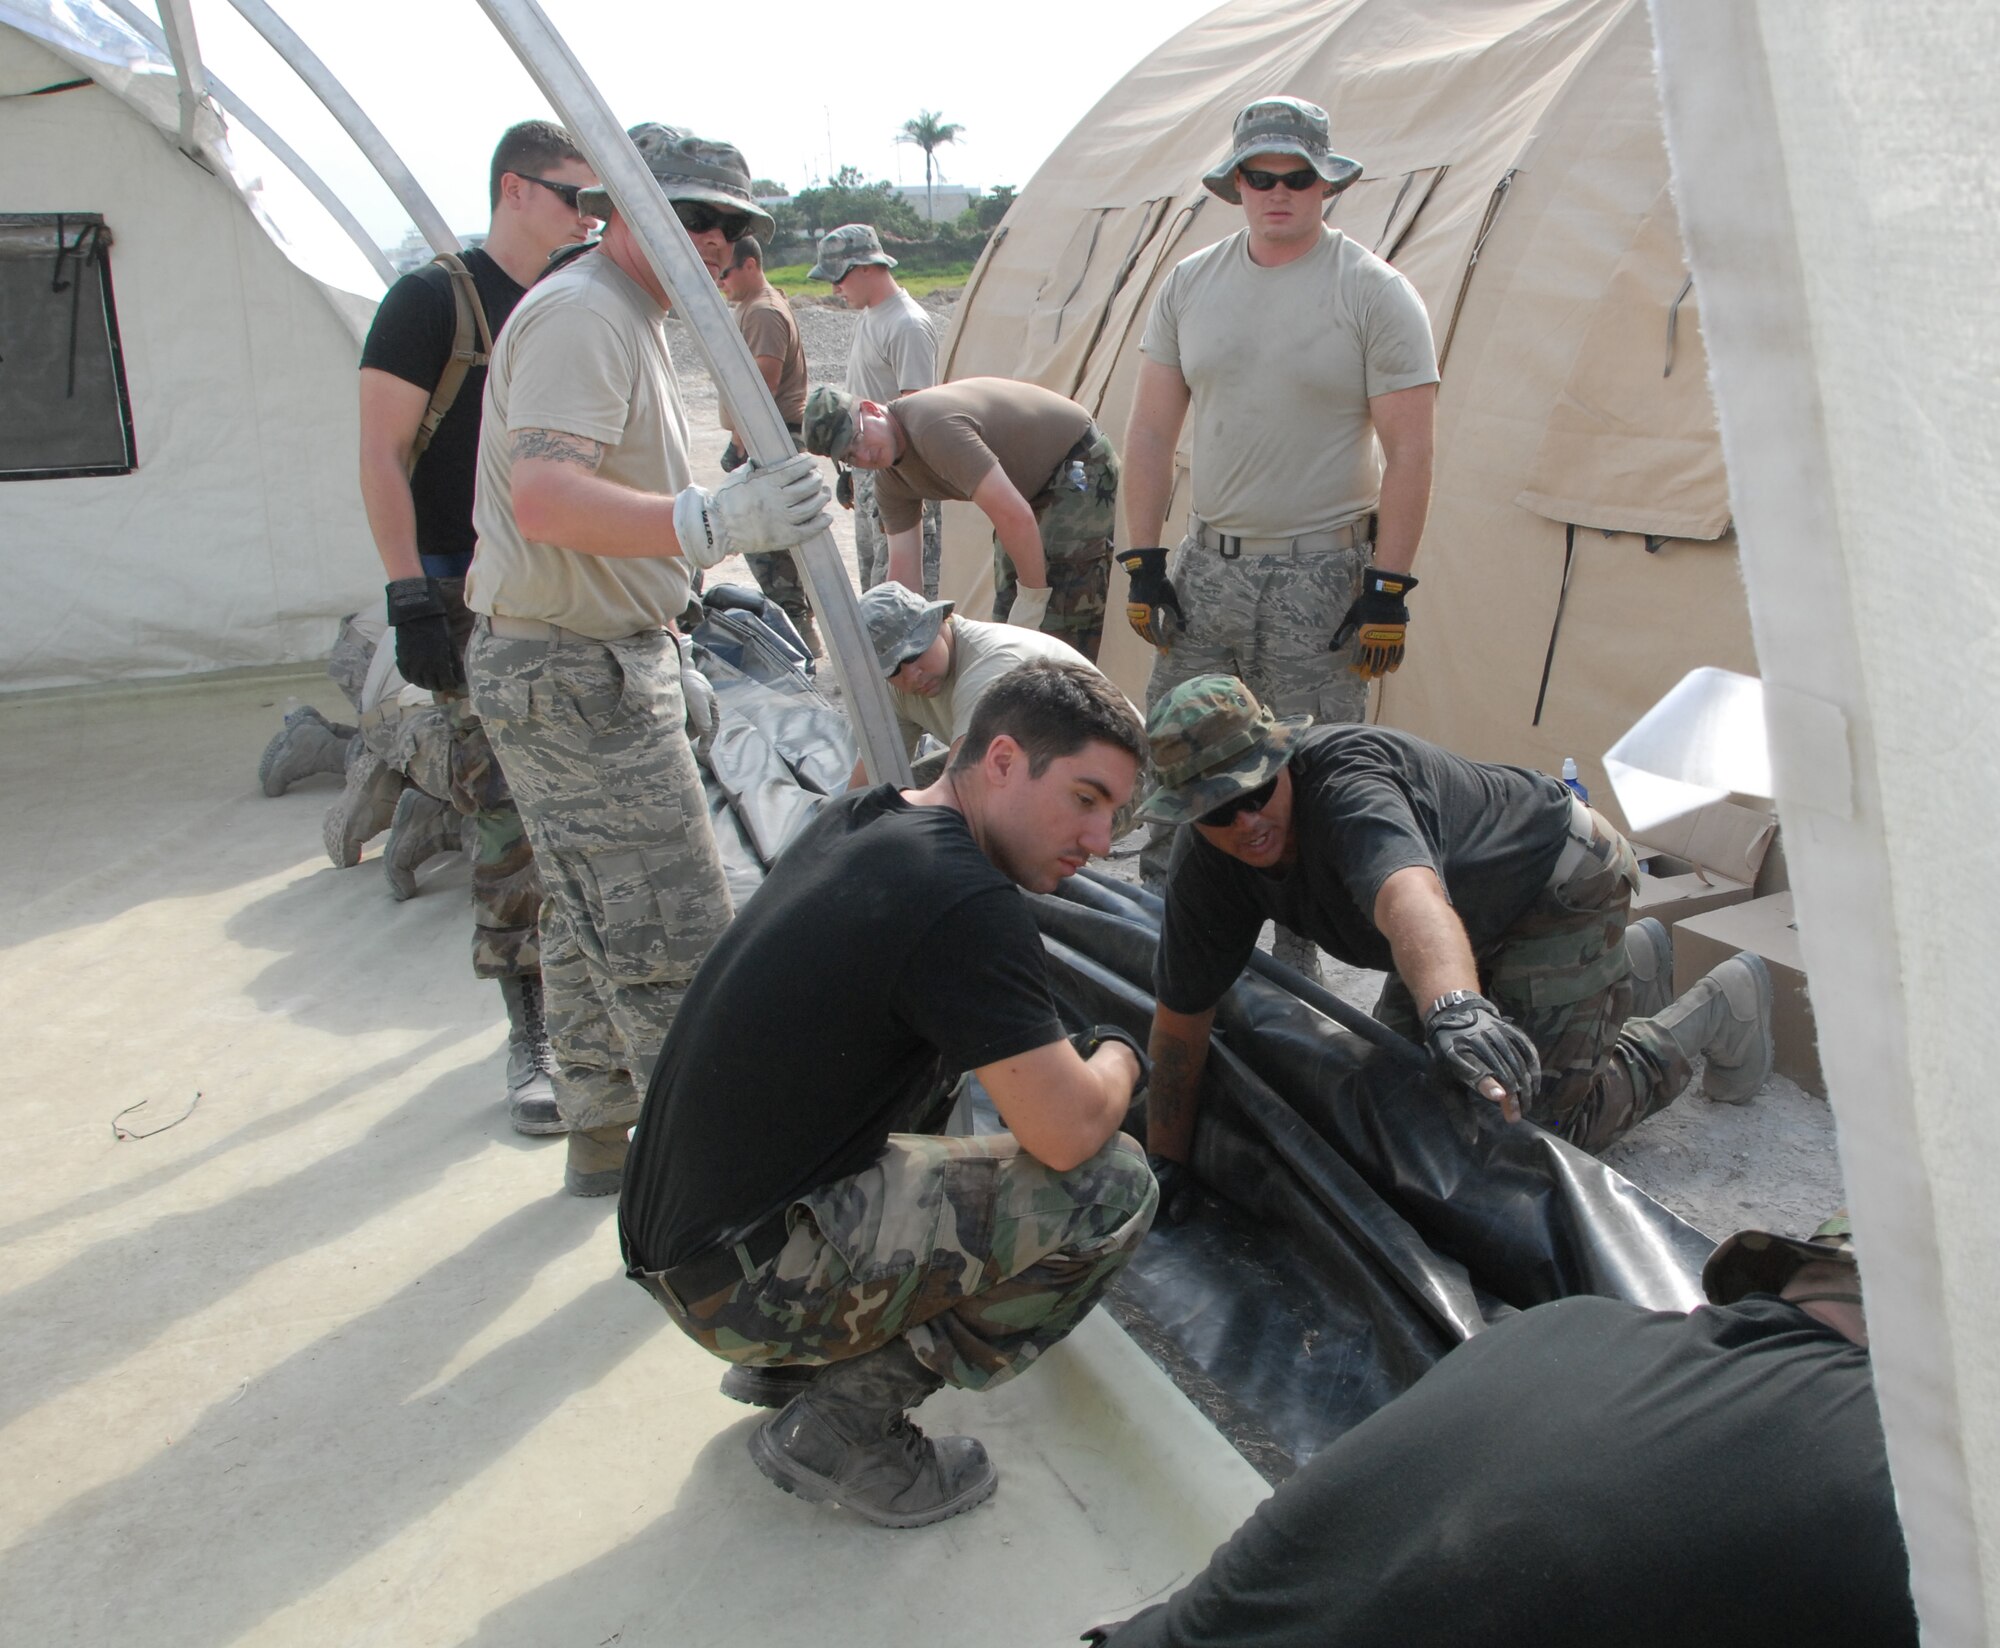 Staff Sgt. Travis Barclay, pointing, directs other Airman while building a tent to be used for medical and relief operations.